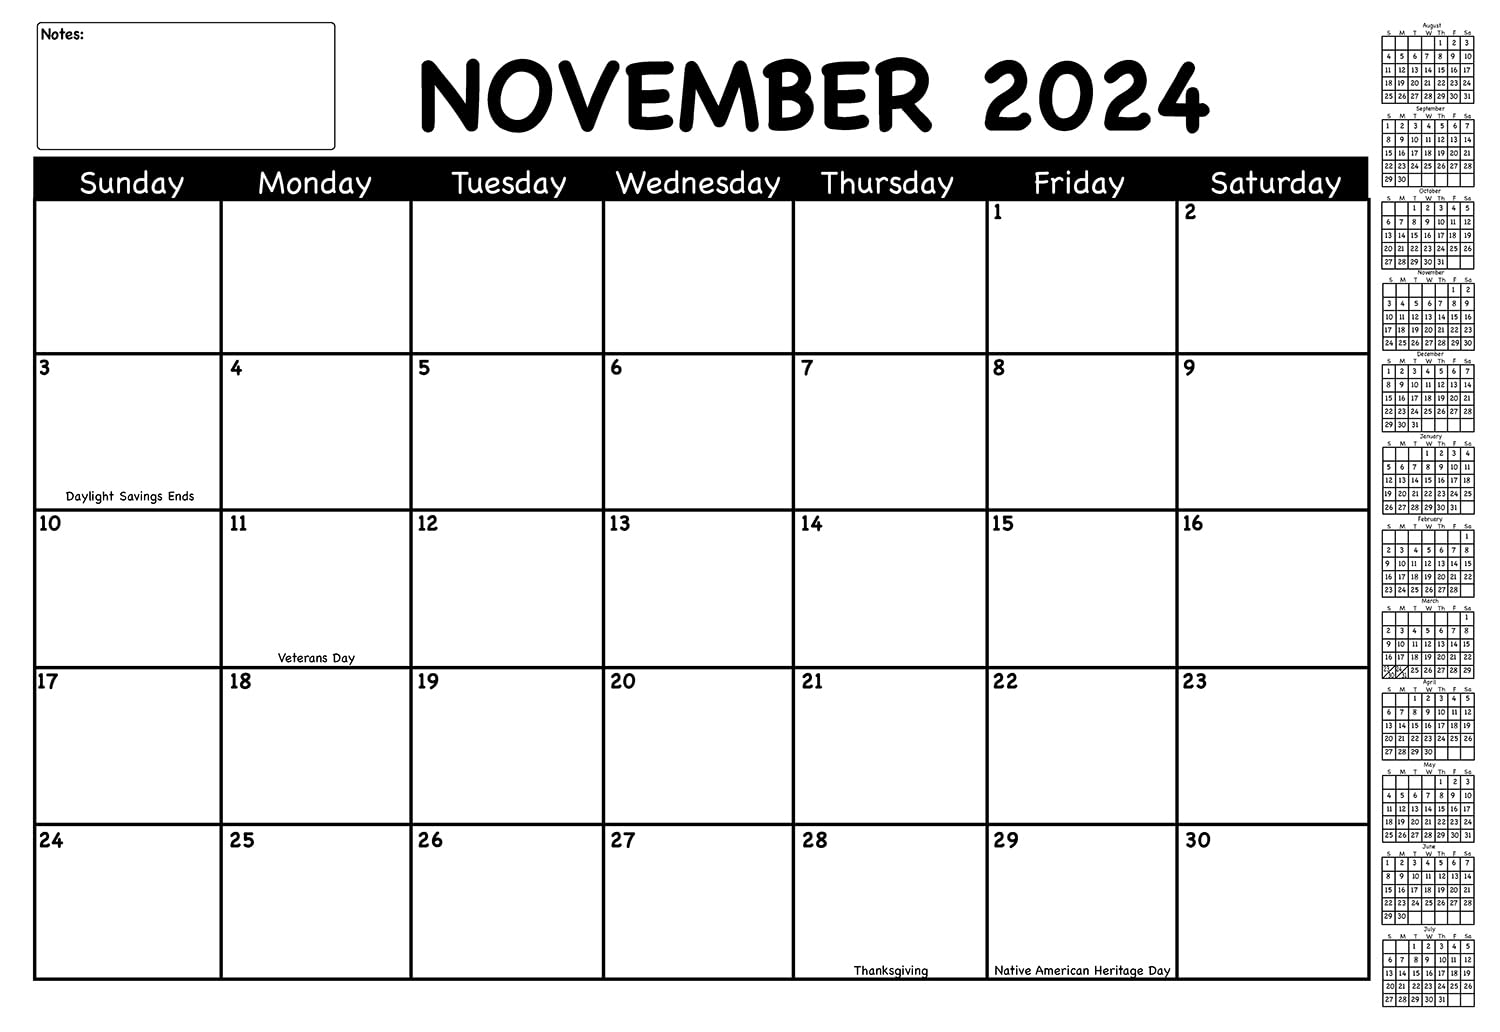 2024-2025 Academic Year Desk Calendar Black/White with Previews, 12 months from August 2024-July 2025 with notes space and holidays, 13” x 19” Wall/Desk Calendar for Teacher Planner, Daily Planning, Lesson Plans, Classroom Office Home, Organization